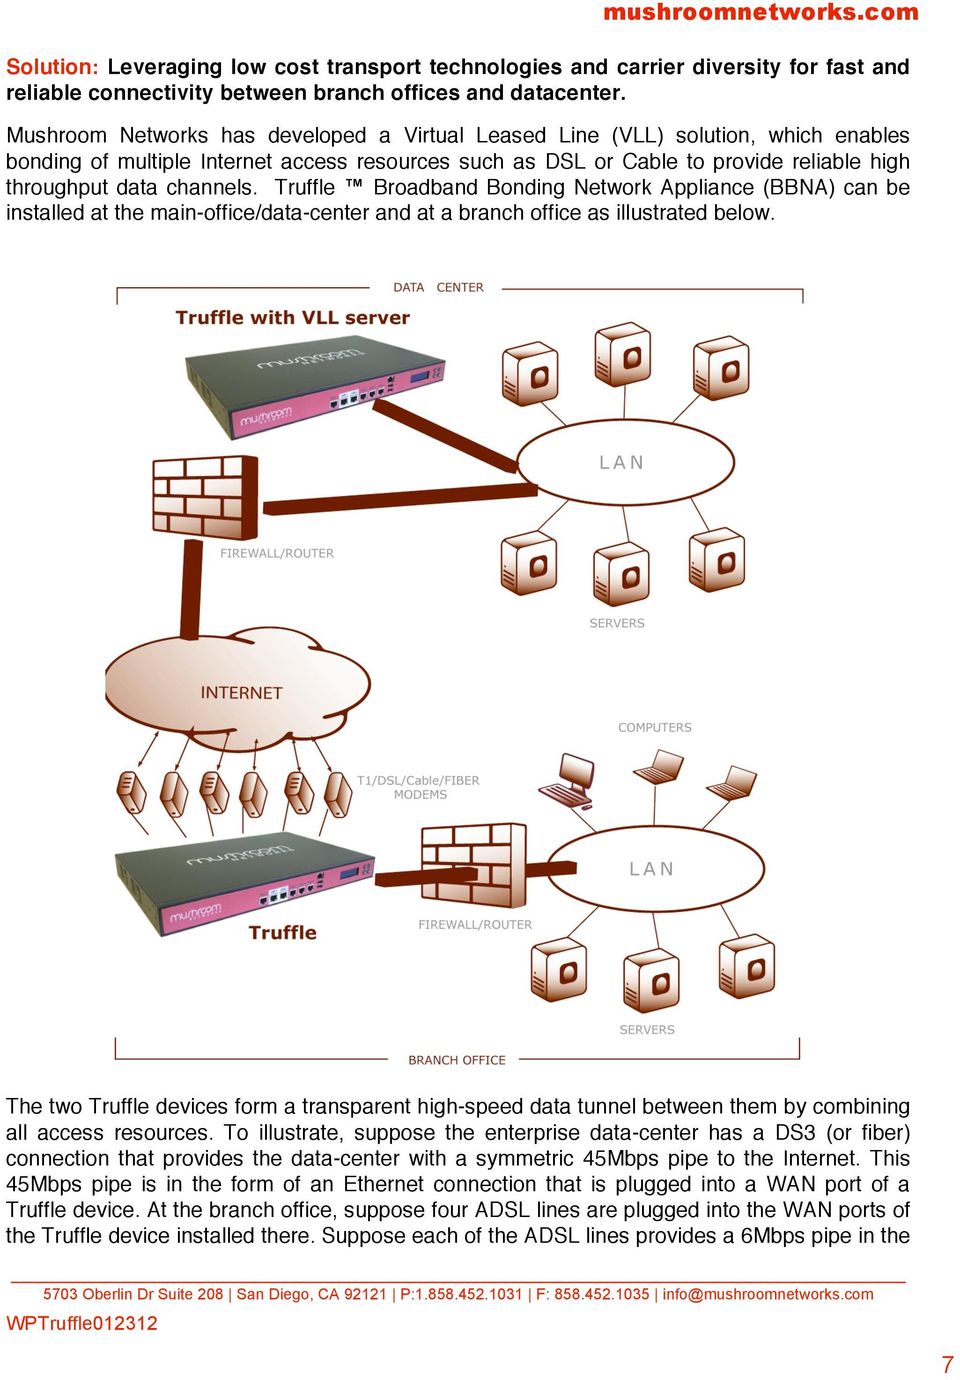 channels. Truffle Broadband Bonding Network Appliance (BBNA) can be installed at the main-office/data-center and at a branch office as illustrated below.